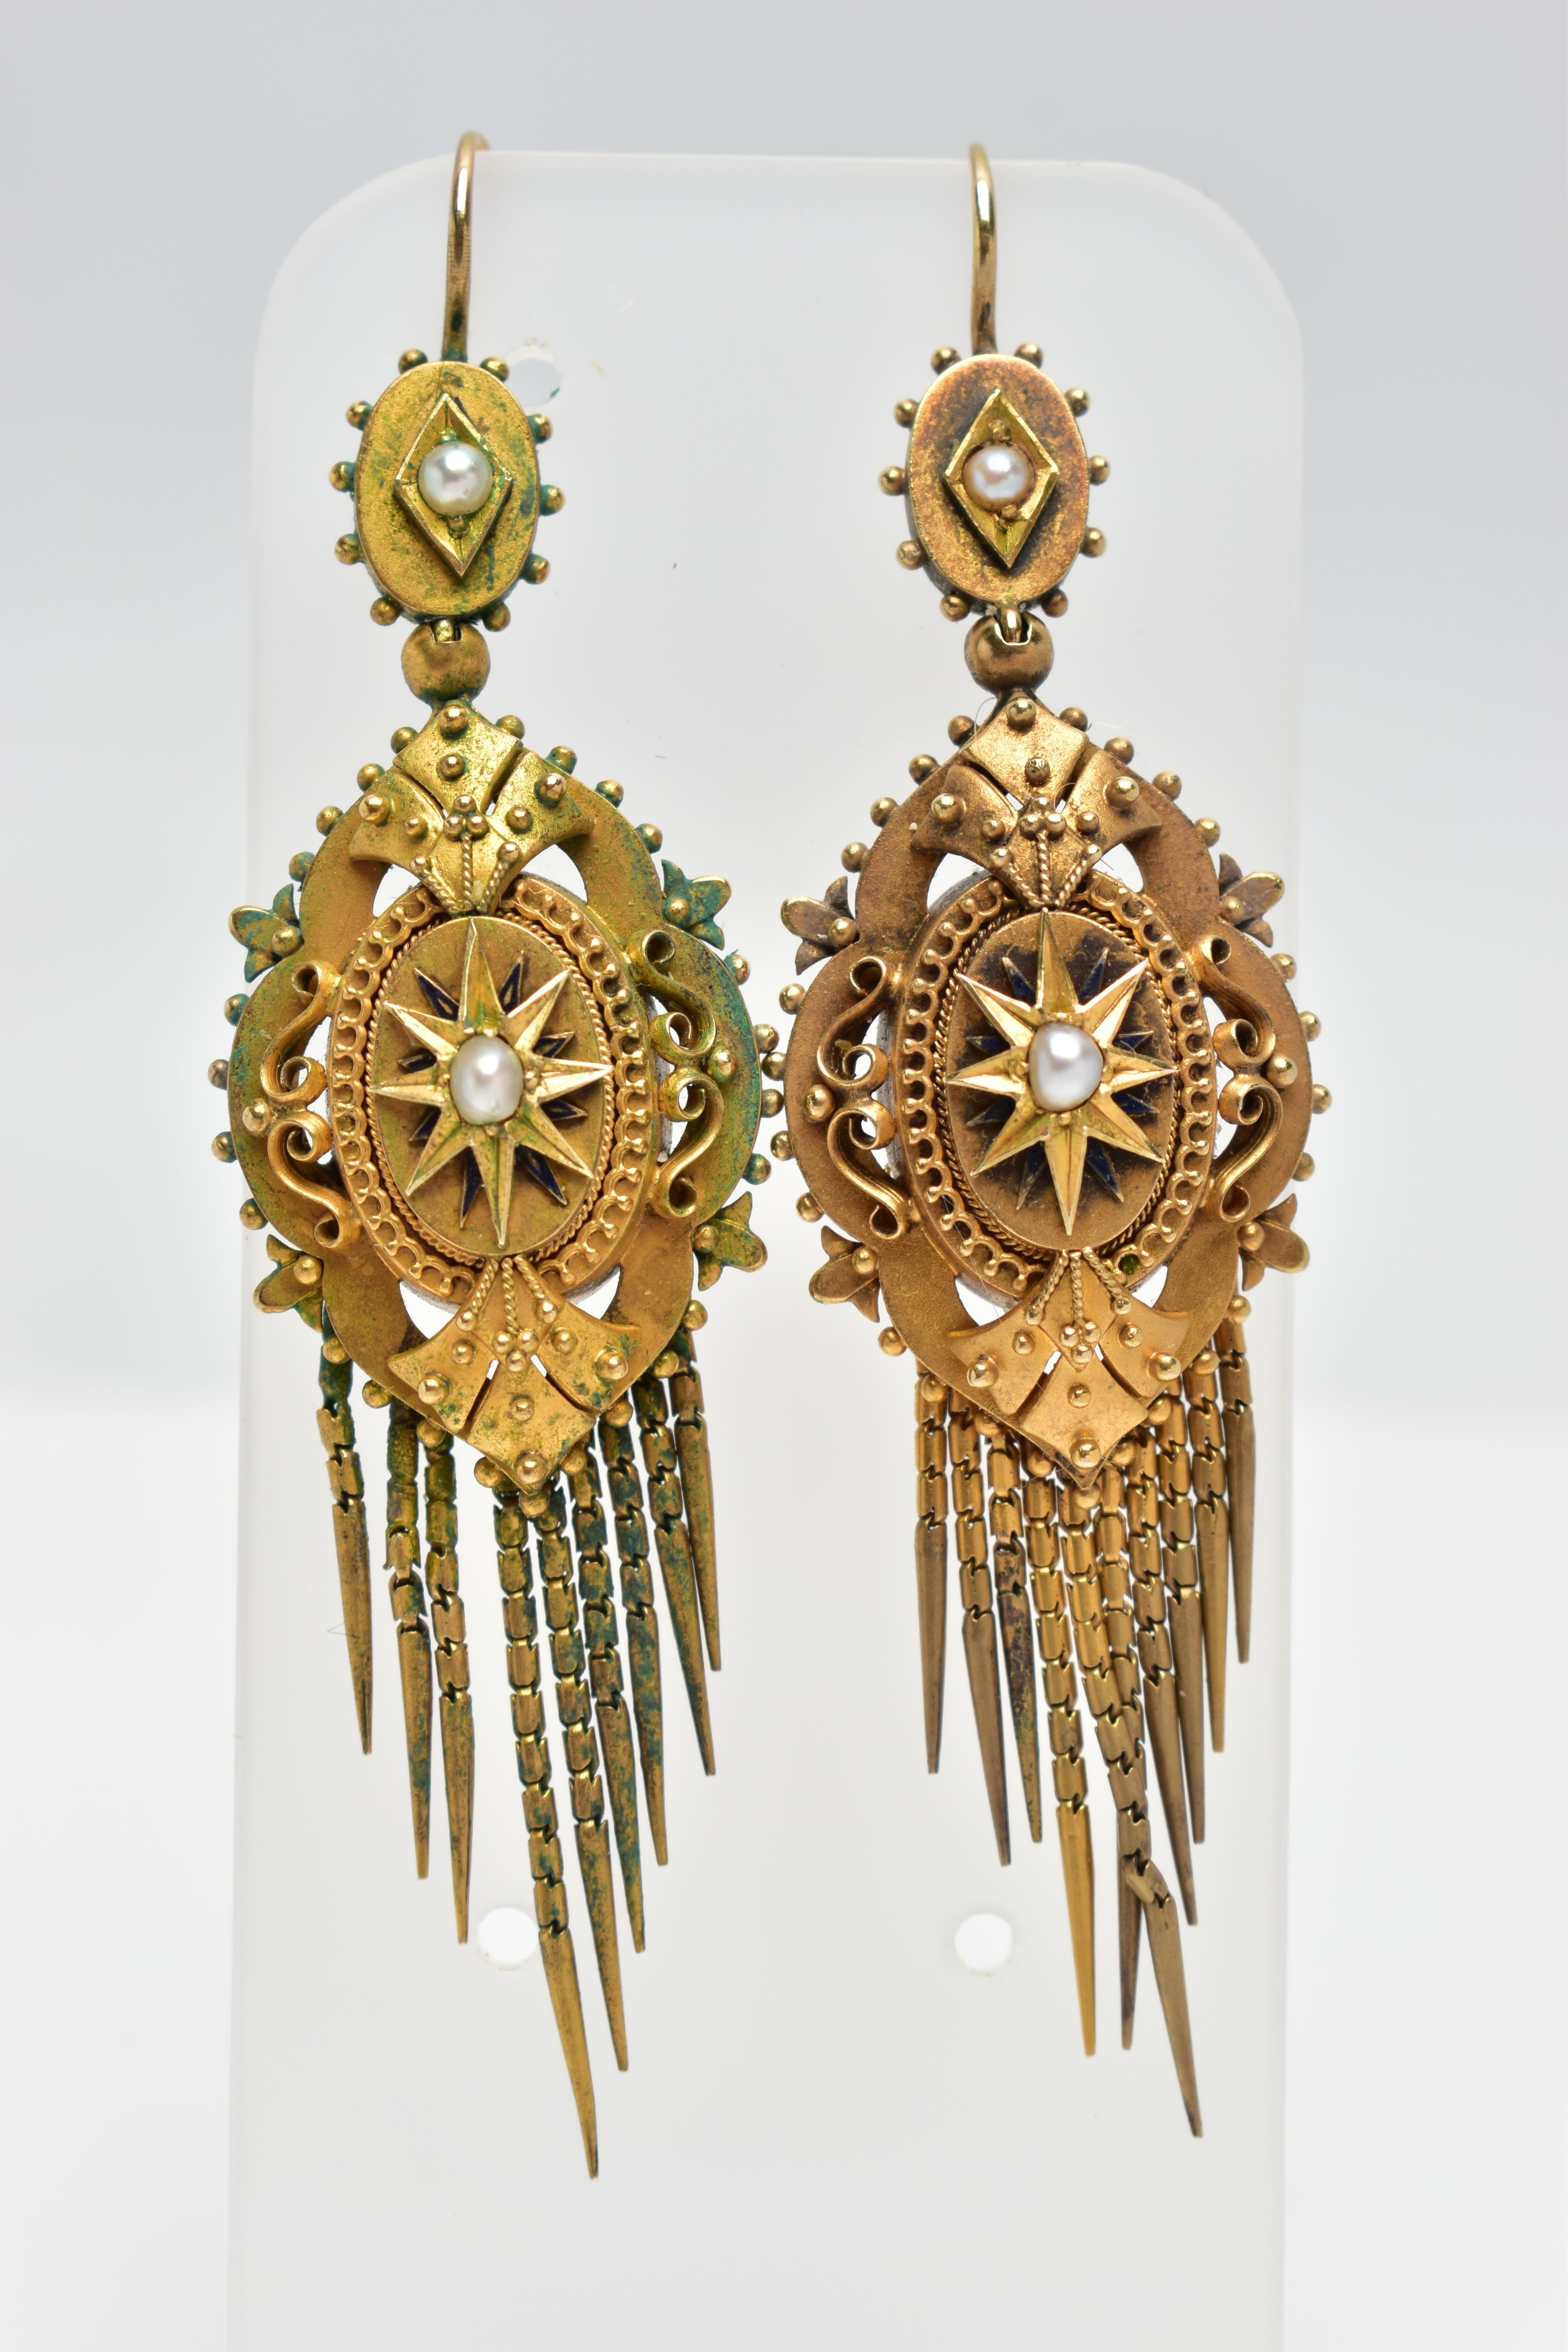 A PAIR OF MID 19TH CENTURY ETRUSCAN STYLE EARRINGS, yellow metal Victorian drop earrings, fish